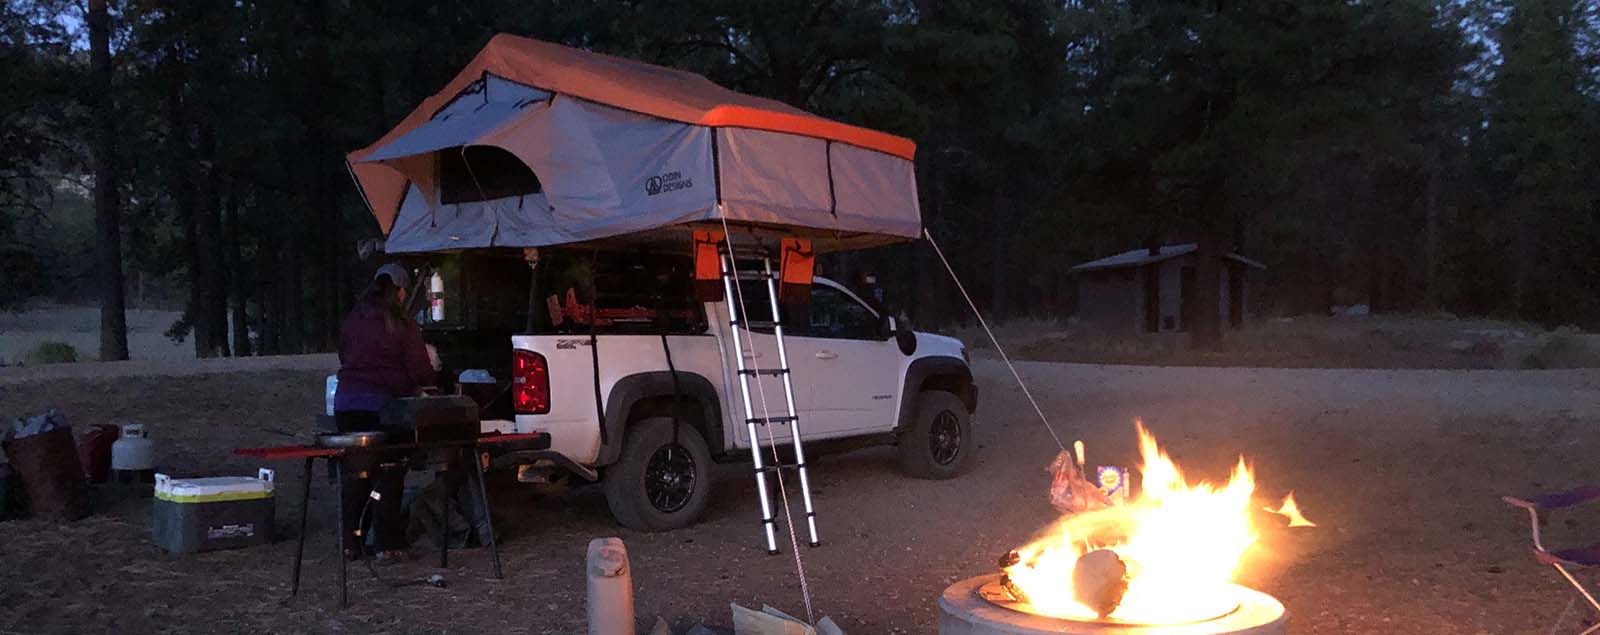 Truck camping near a campfire on the Rimrocker Trail